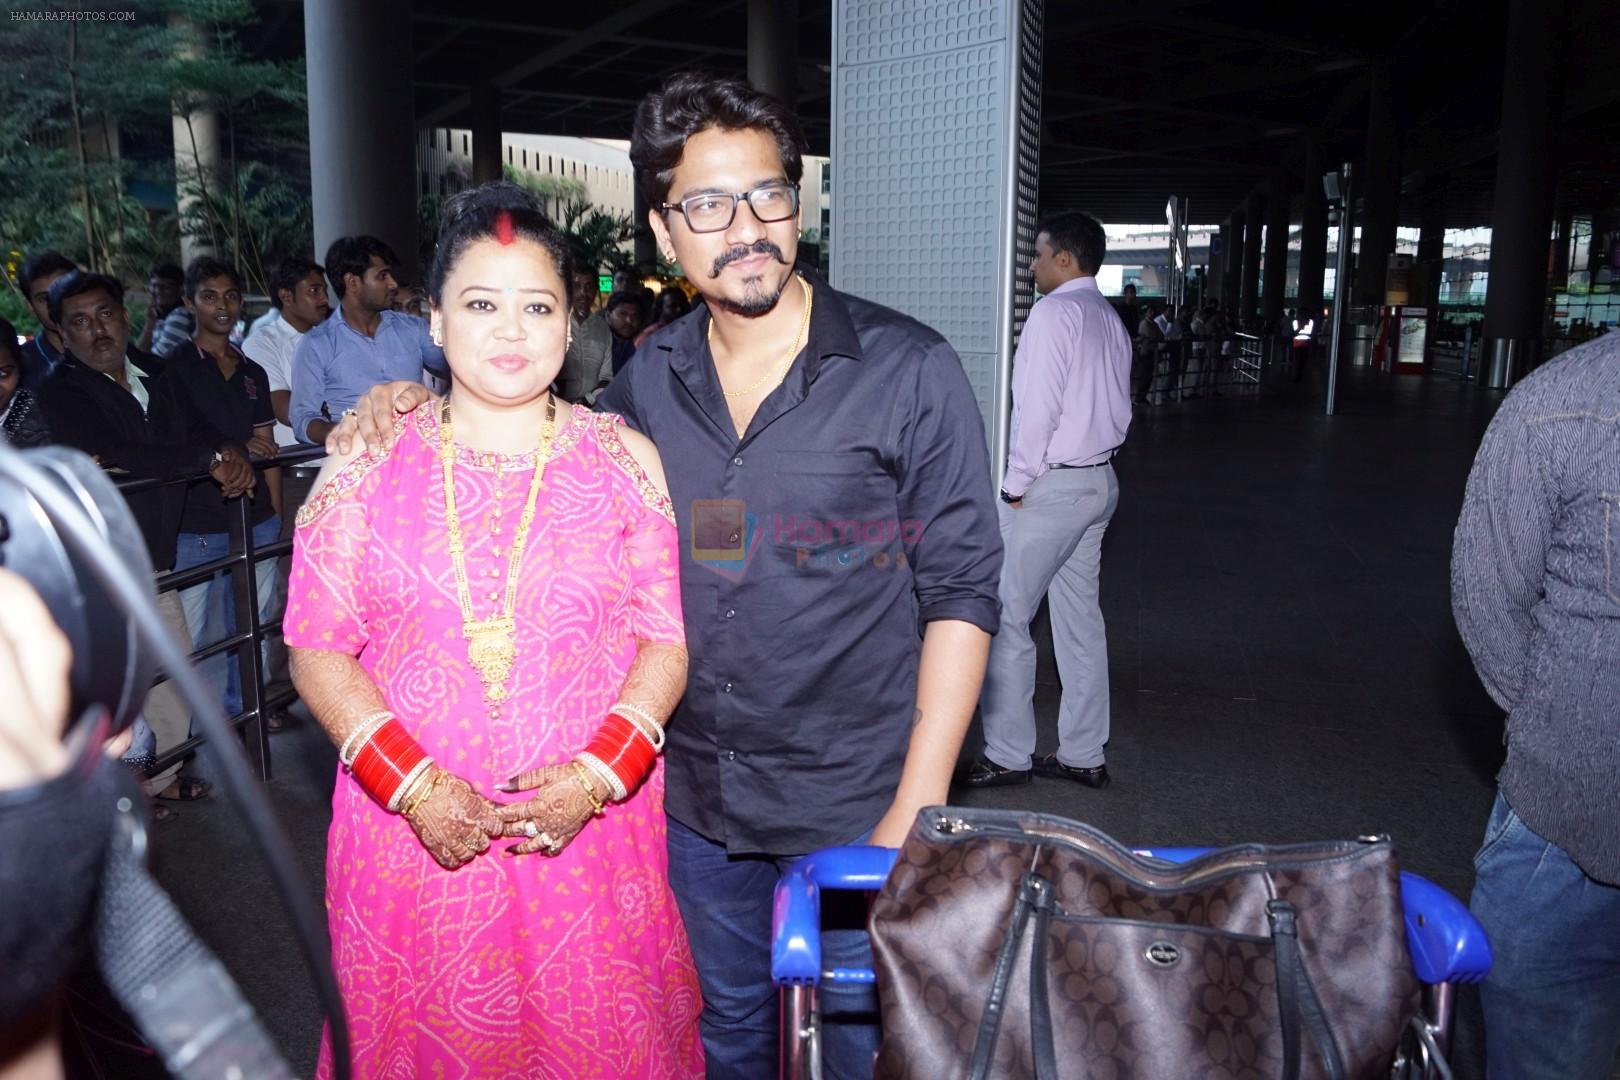 Bharti Singh and Harsh Limbachiyaa spotted in Mumbai After Marriage on 6th Dec 2017